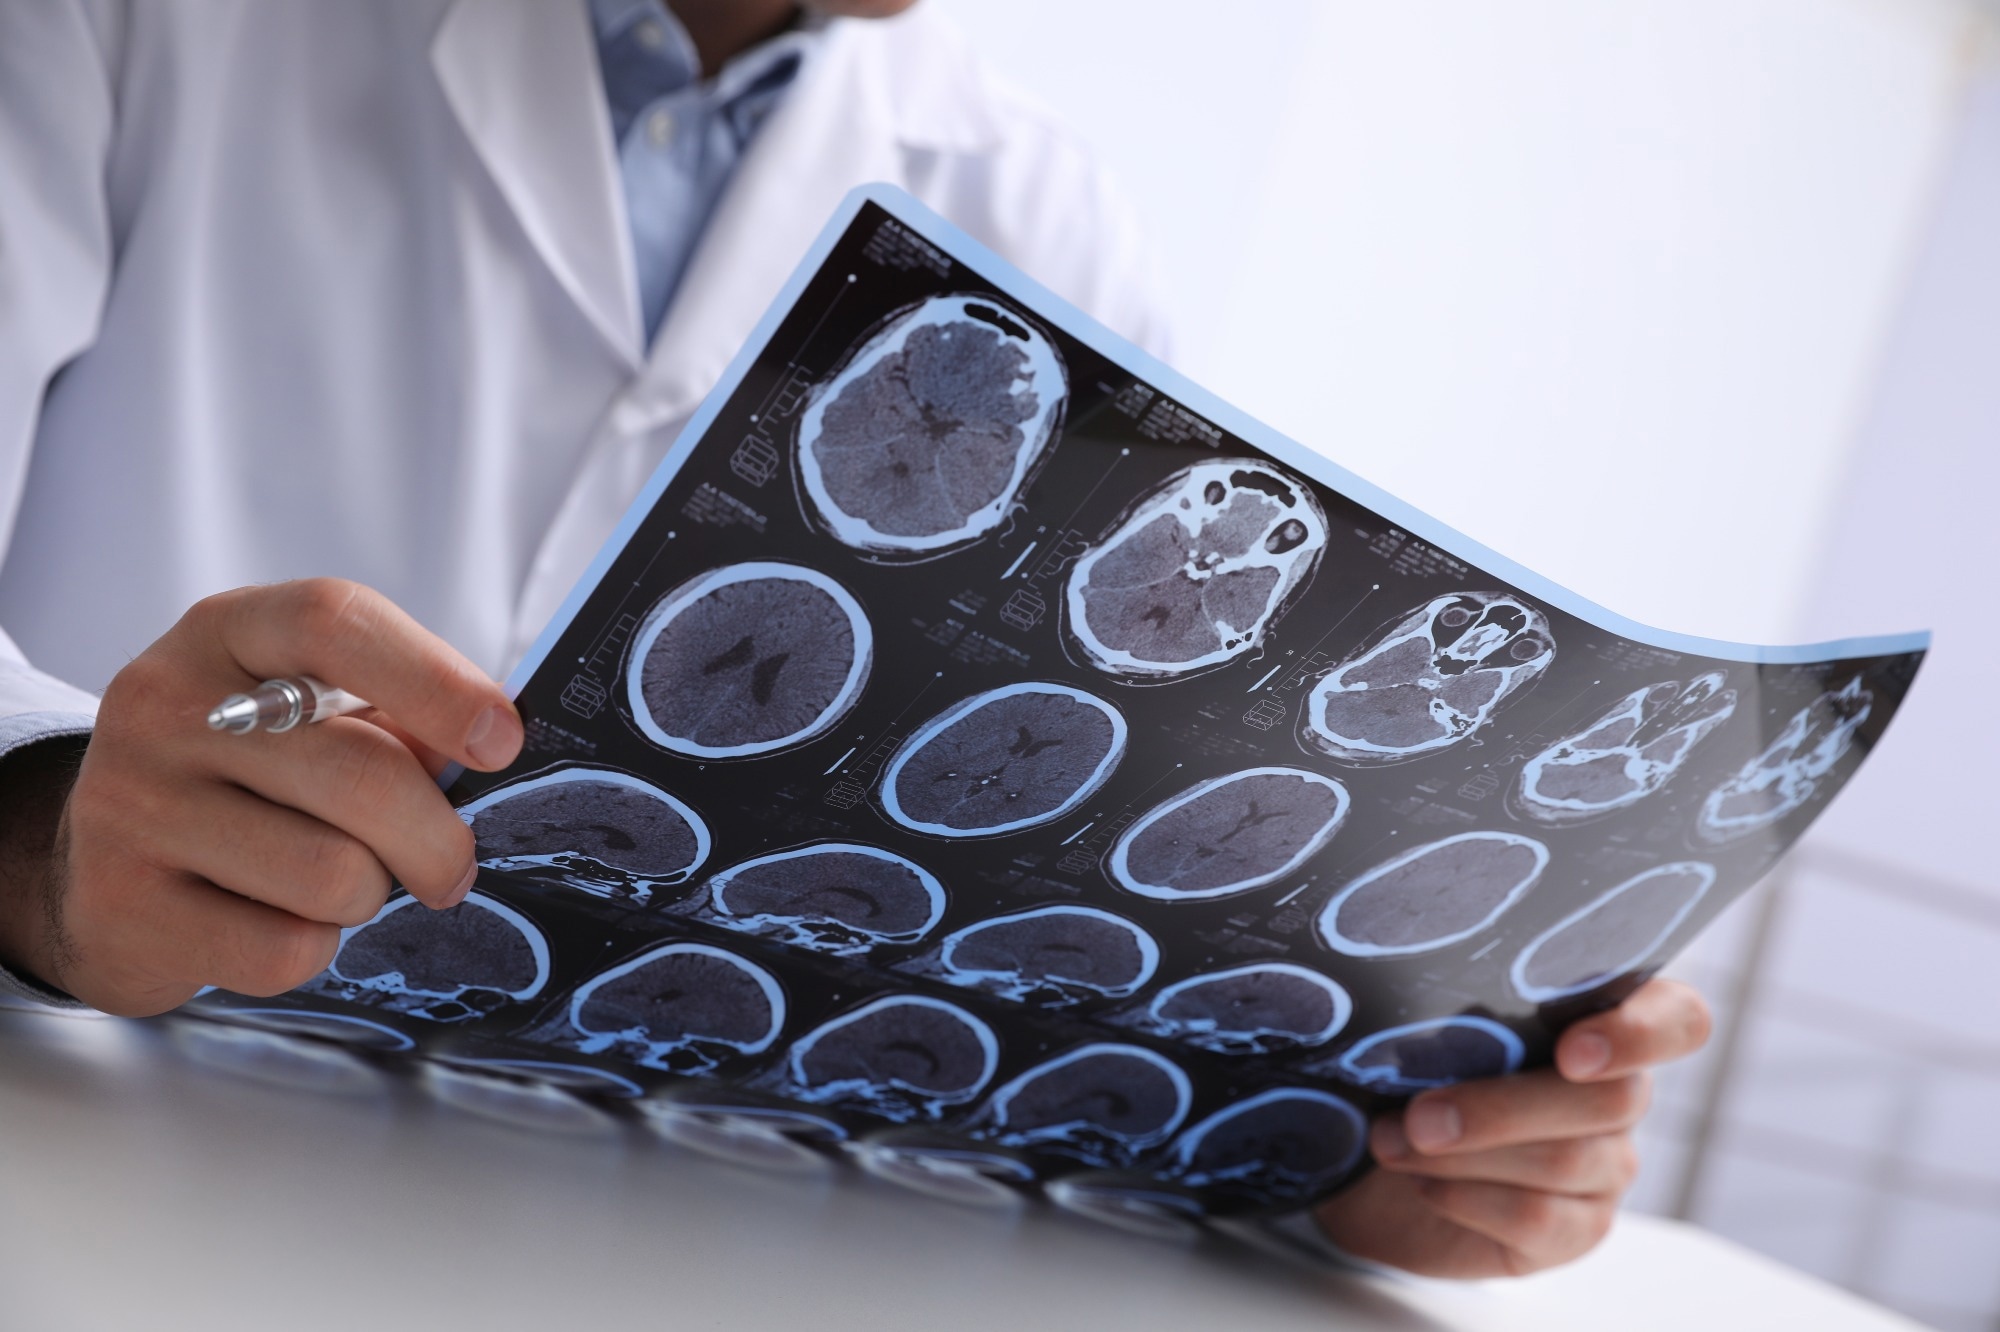 Study: Proteomics reveal biomarkers for diagnosis, disease activity and long-term disability outcomes in multiple sclerosis. Image Credit: New Africa/Shutterstock.com